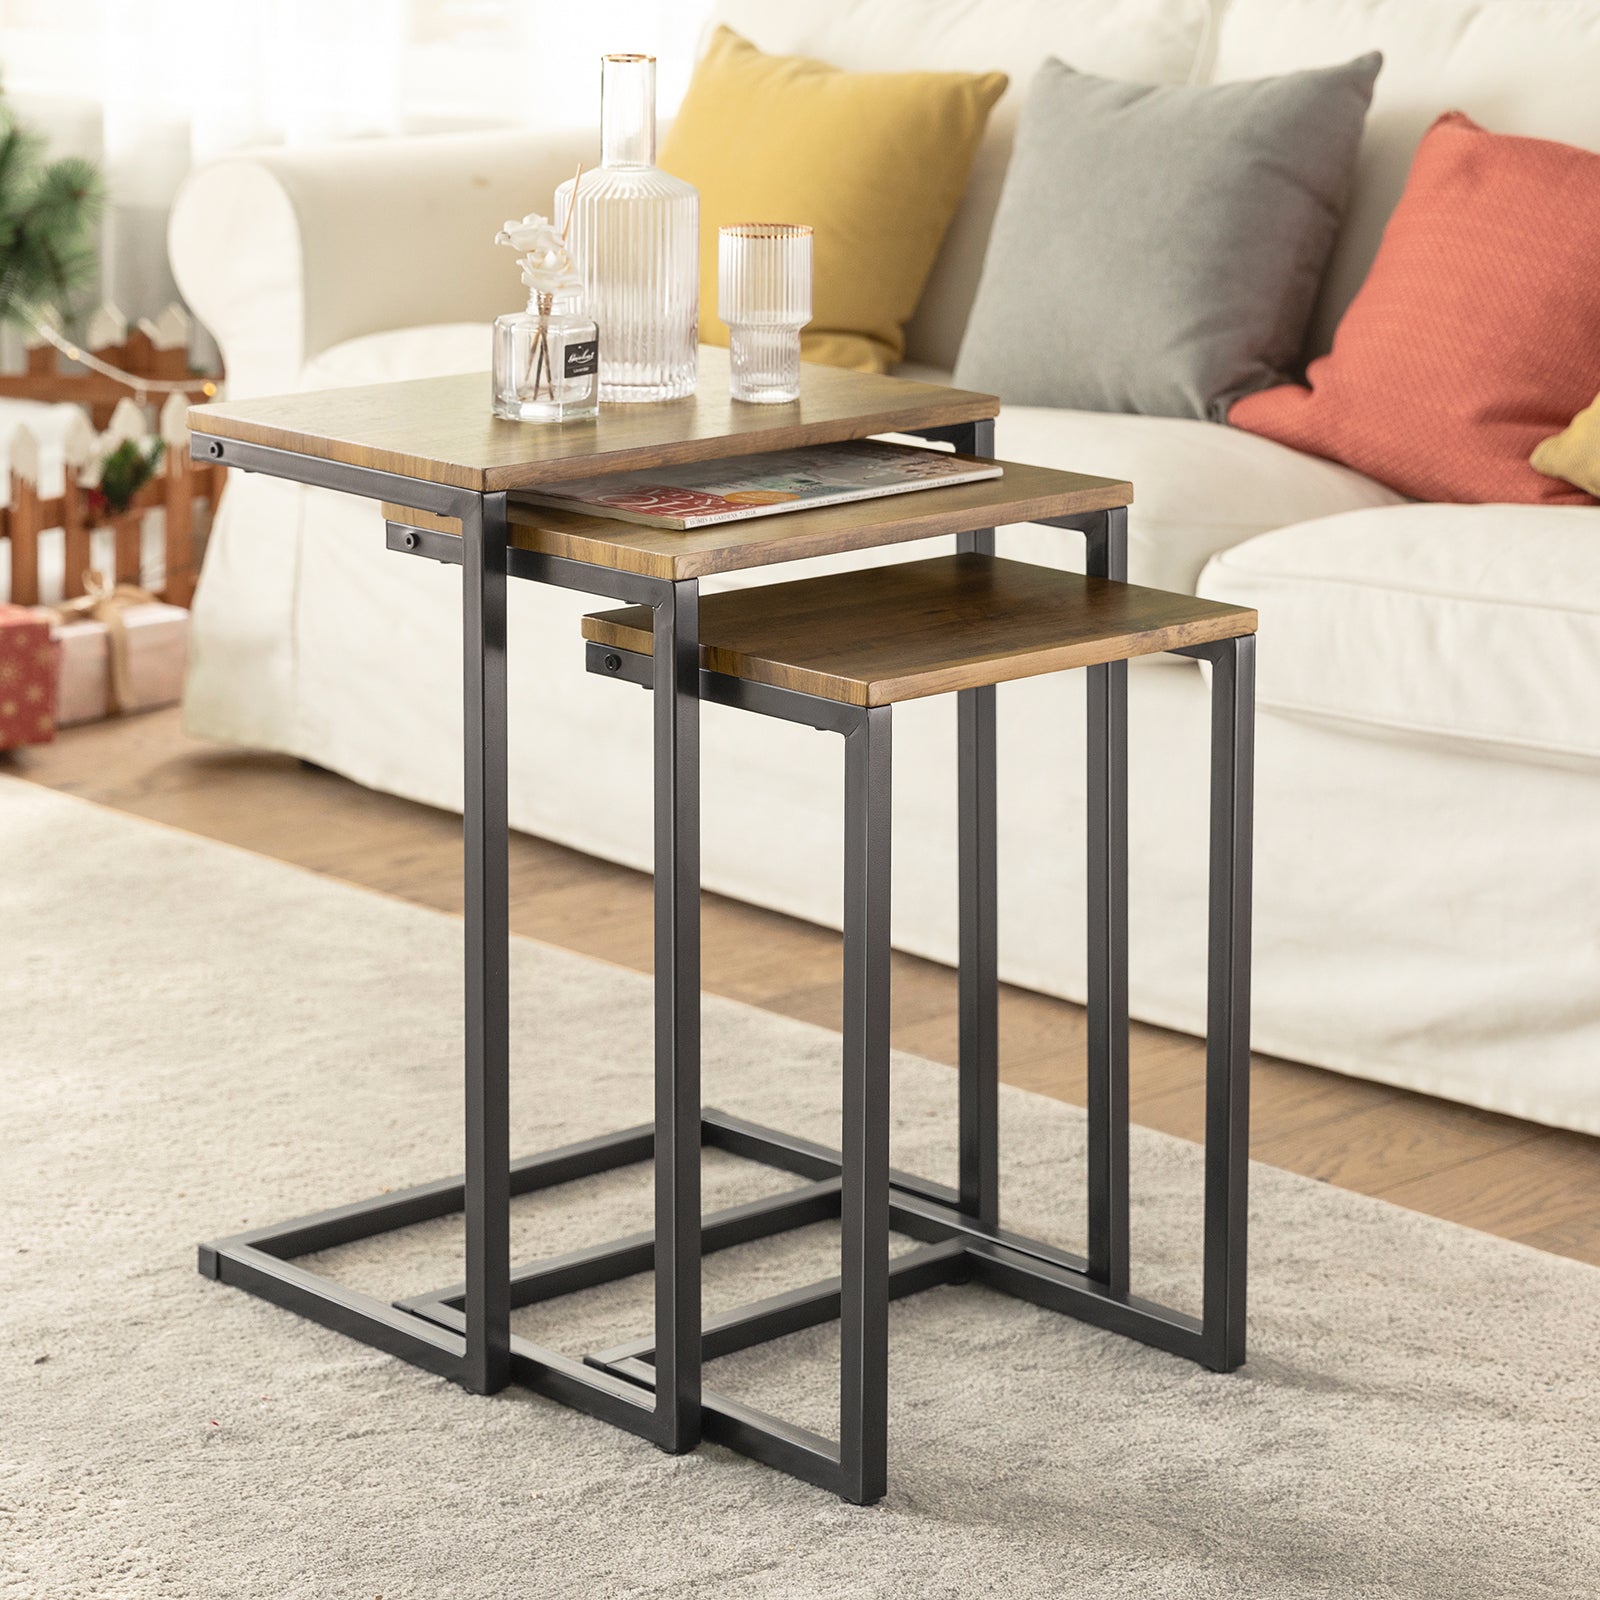 SoBuy FBT102-F Nesting Tables Set of 3 Coffee Tables Living Room Stacking Side Tables